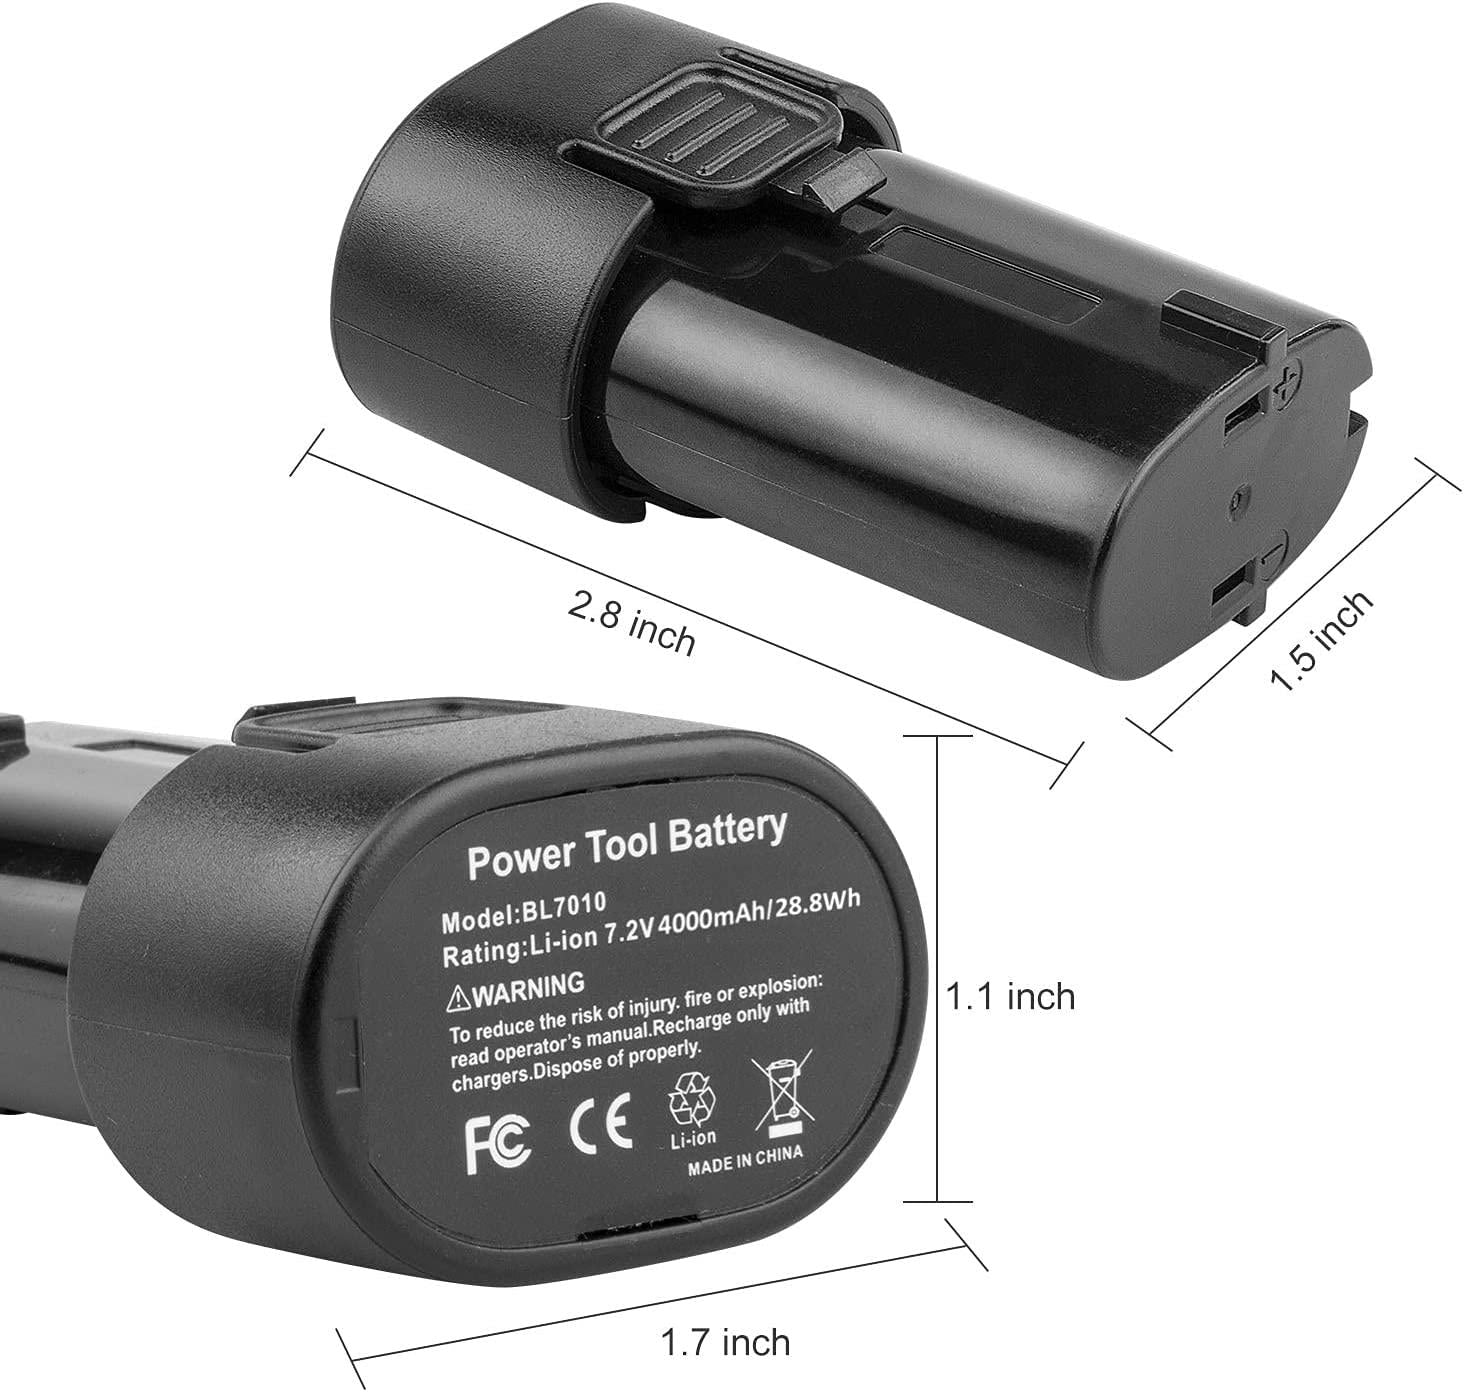 Labtec, LabTEC BL7010 7.2V 4000mAh Lithium Replacement Battery for Makita BL7010 194355-4 194356-2 198000-3 Cordless Power Tool Battery